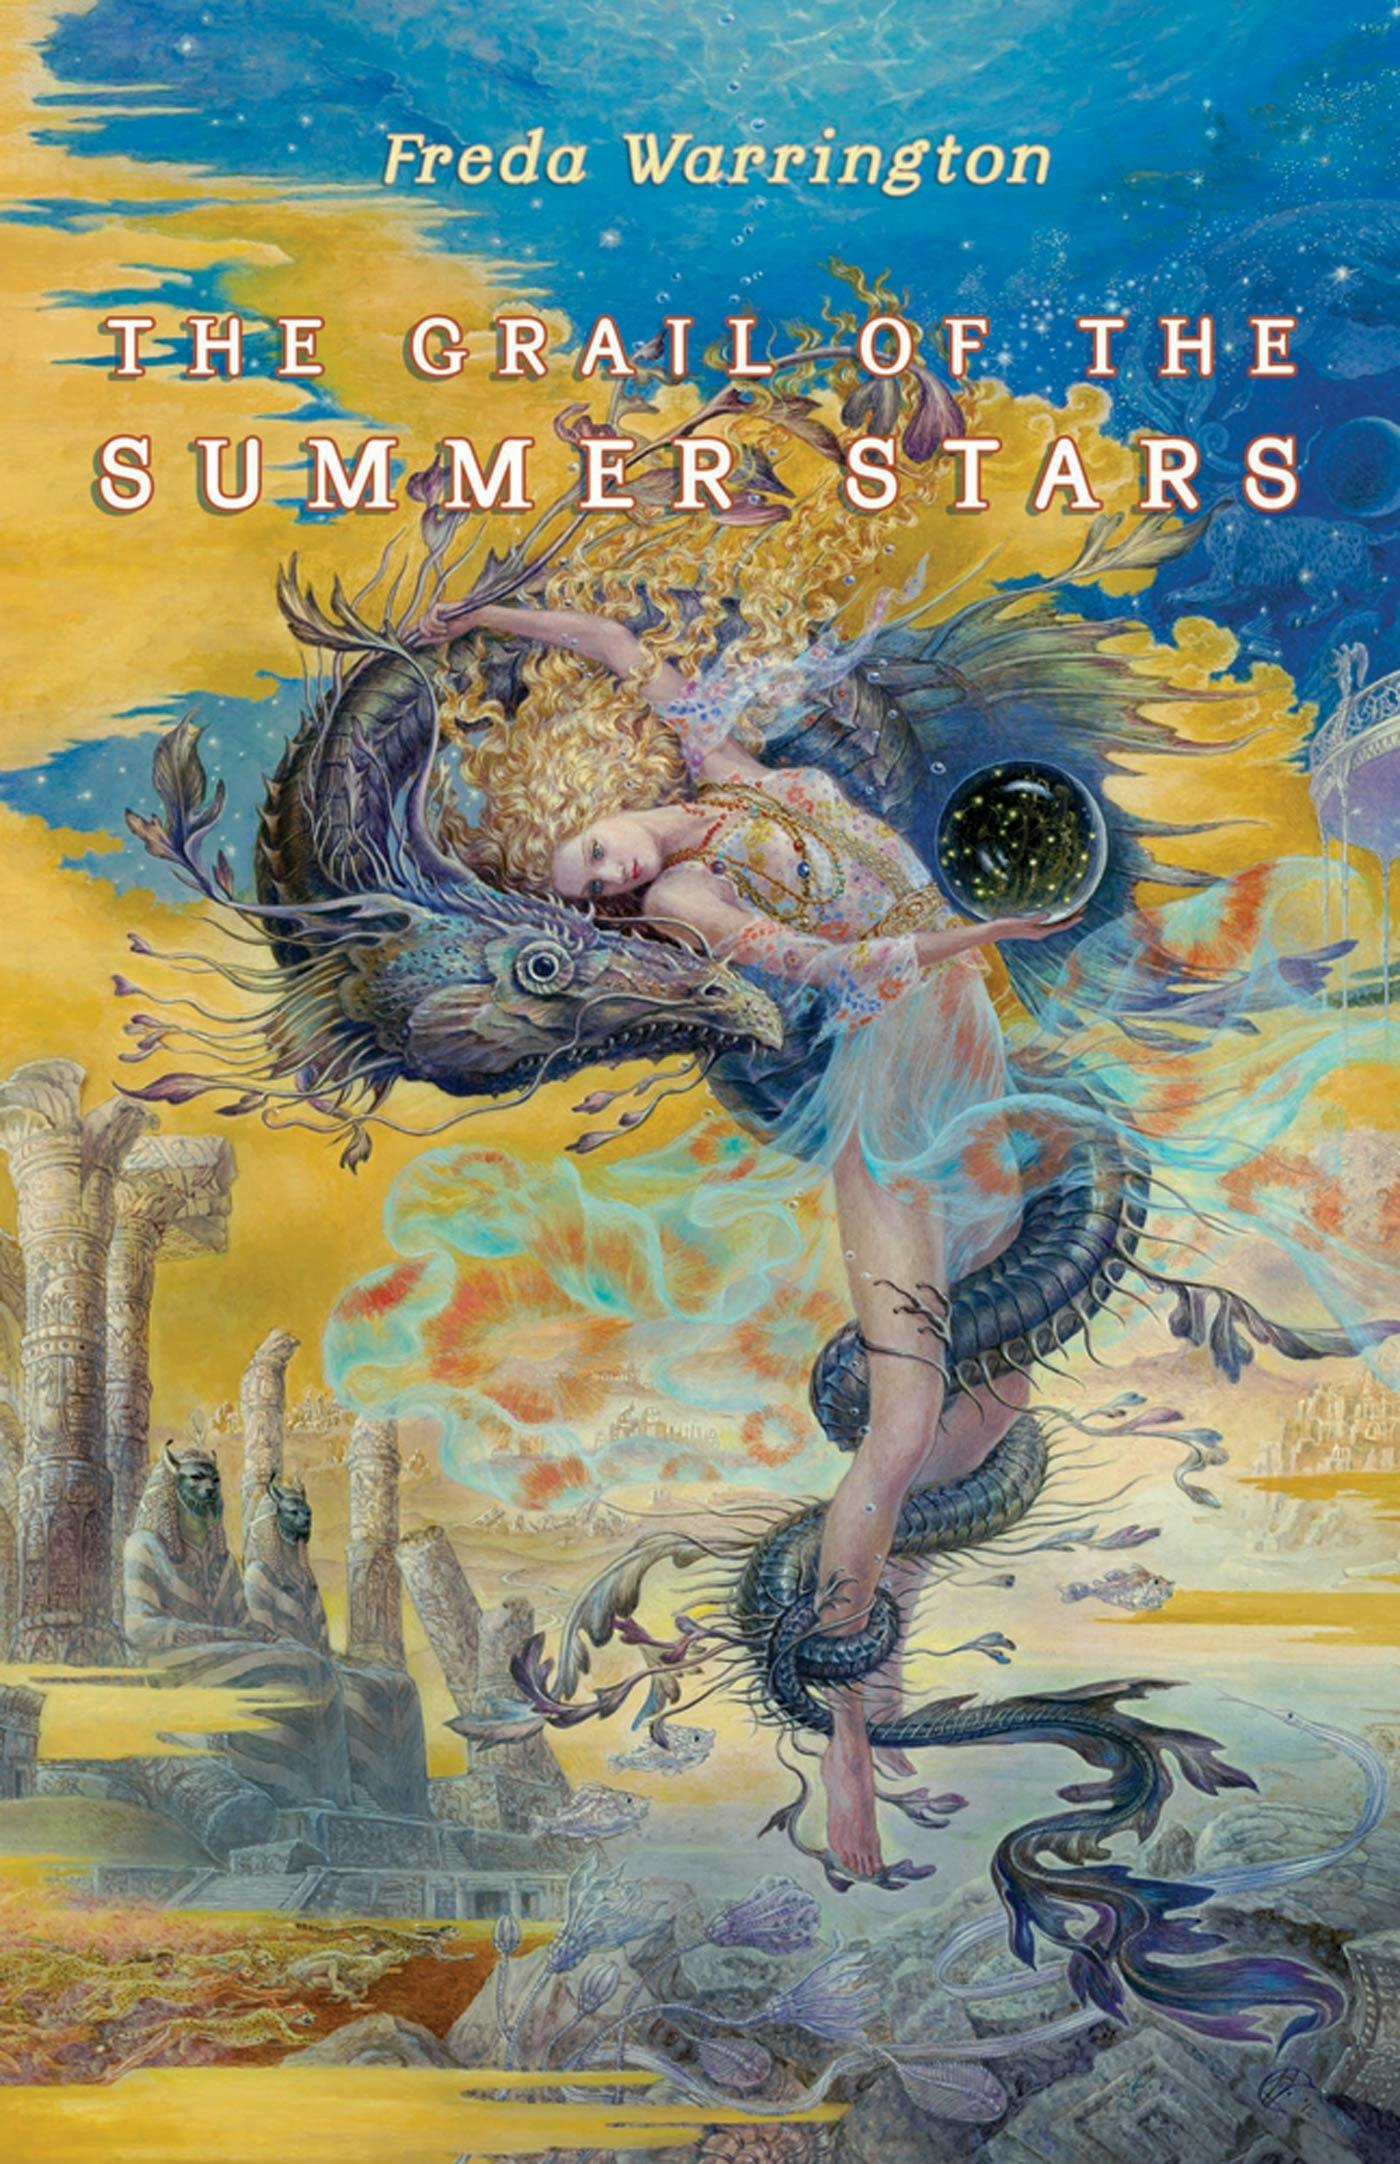 Cover for the book titled as: Grail of the Summer Stars